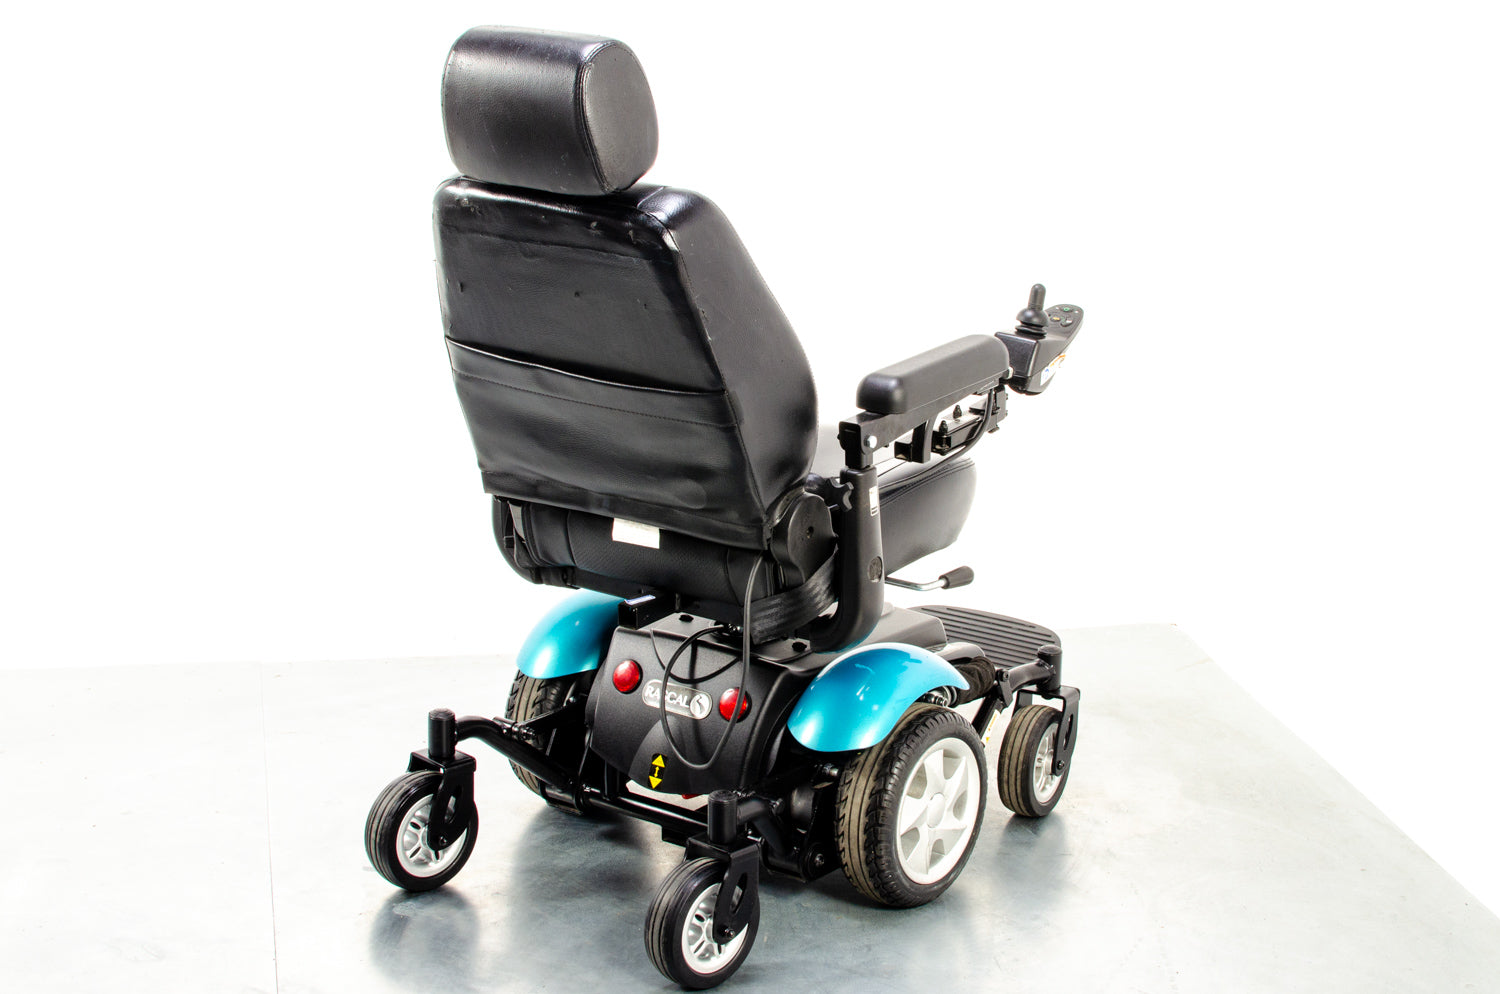 Rascal P327 Used Powerchair Electric Mobility Wheelchair Teal 4mph MWD